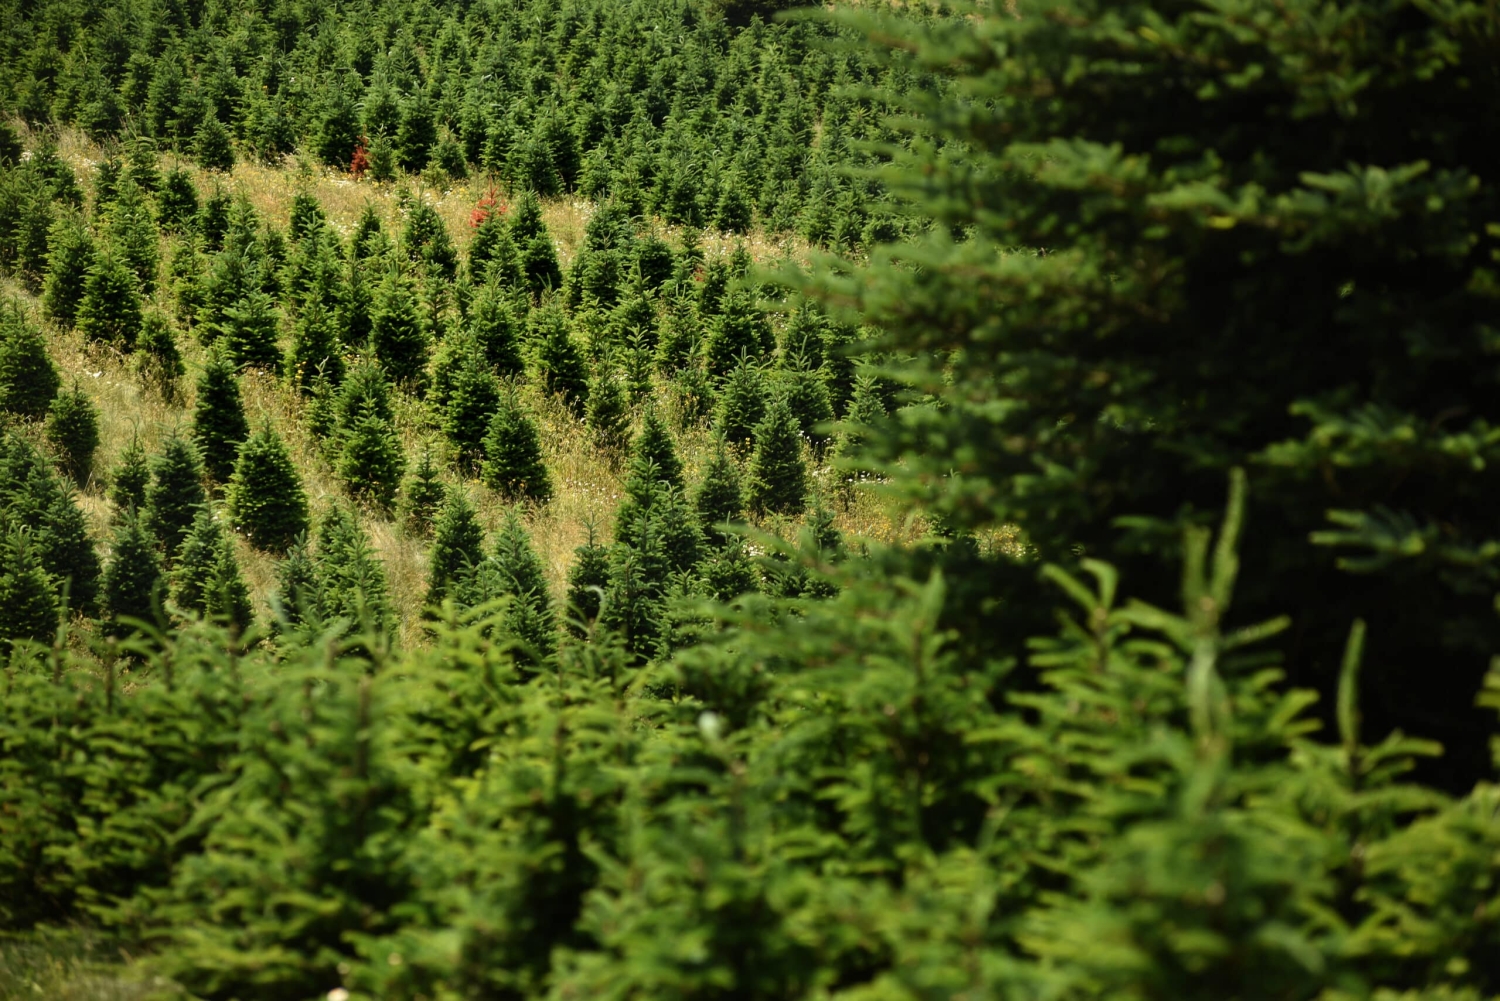 Fraser firs at Panoramic View Christmas Tree Farm in Watauga County, outside Boone. - What Can You Expect at a North Carolina Christmas Tree Lot This Year - Forestry and Environmental Resources at NC State University